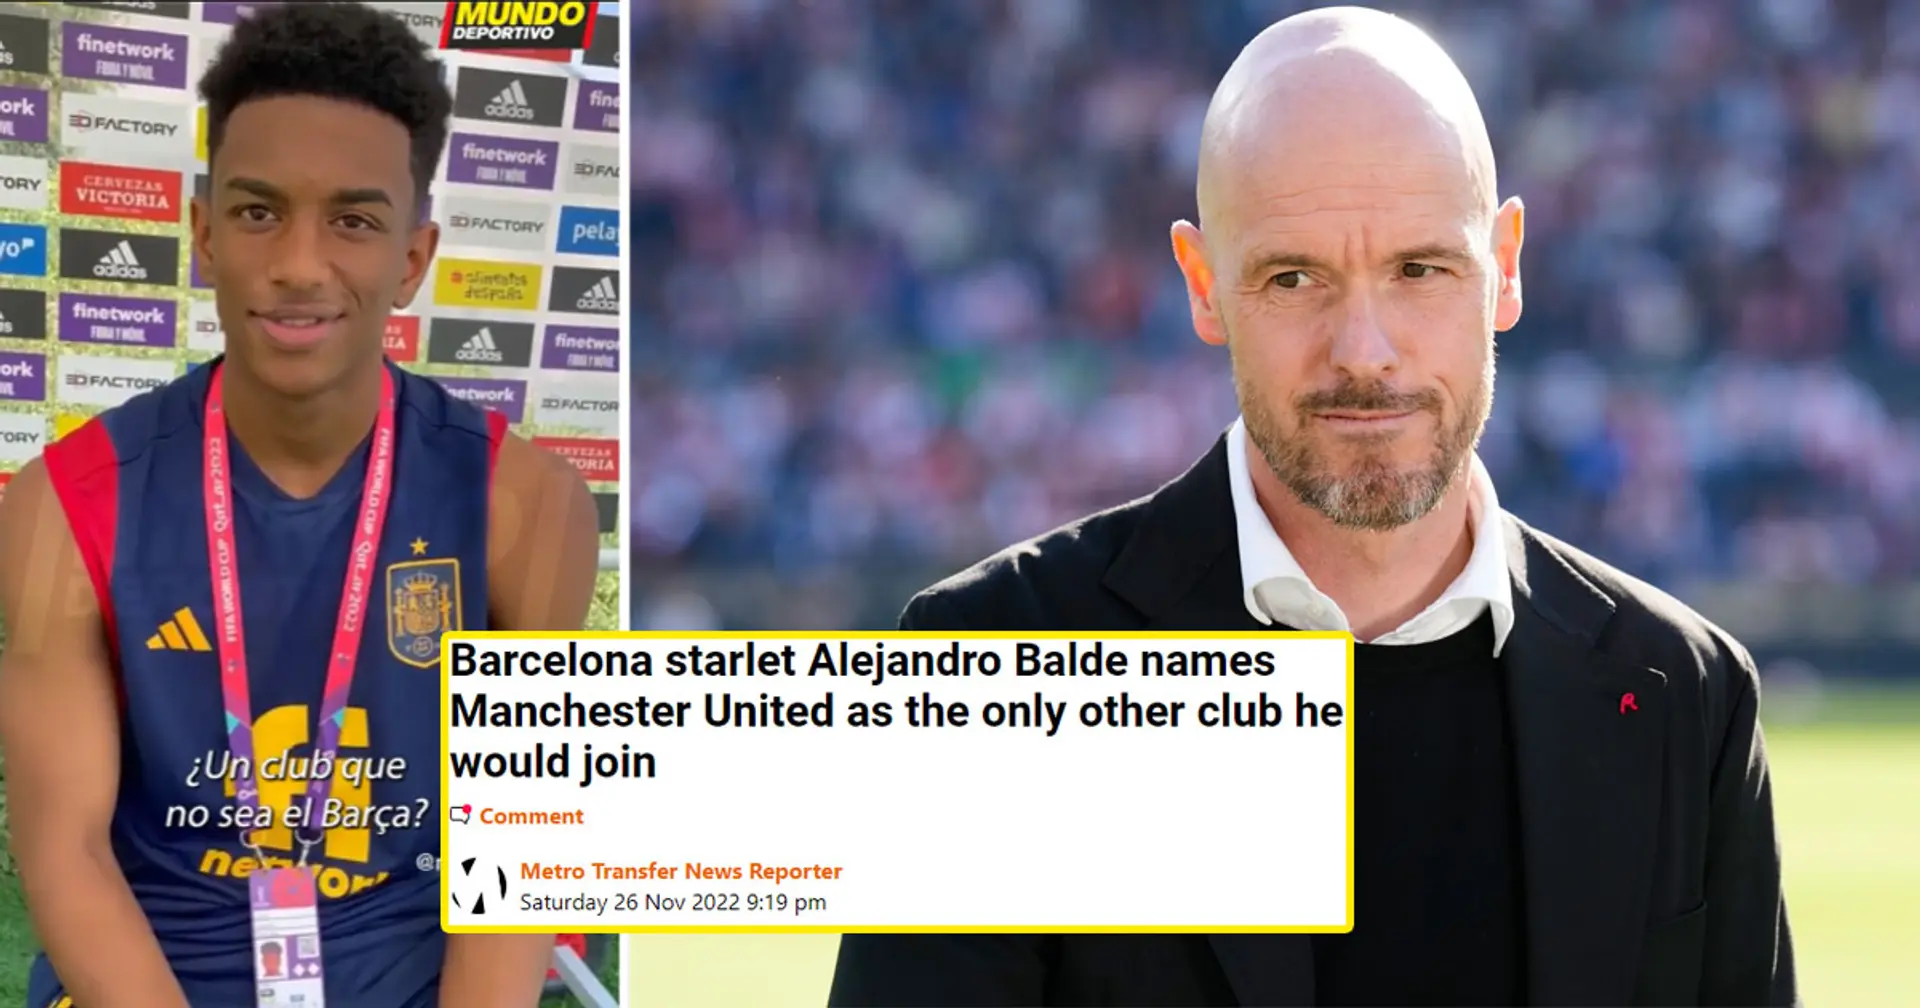 British press spread news about Balde wanting to join United at some point - here's what he actually said